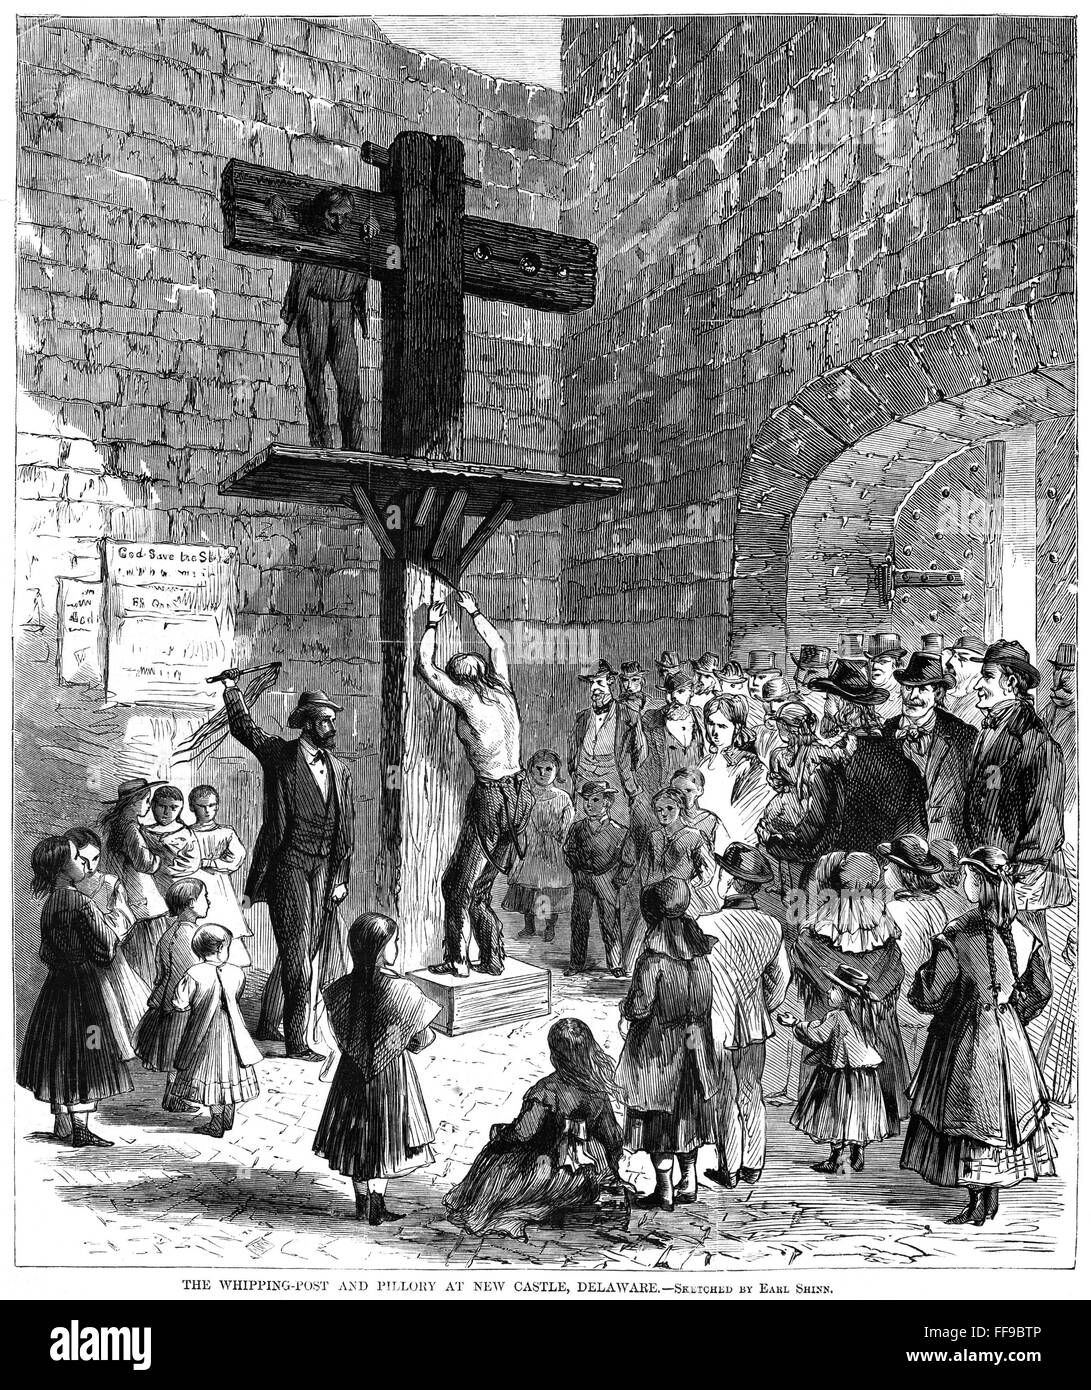 PUBLIC WHIPPING, 1868. /nThe public whipping post and pillory at New Castle, Delaware, 1868, one of the last states to continue the practice of public punishment. Contemporary American wood engraving after a drawing by Earl Shinn. Stock Photo